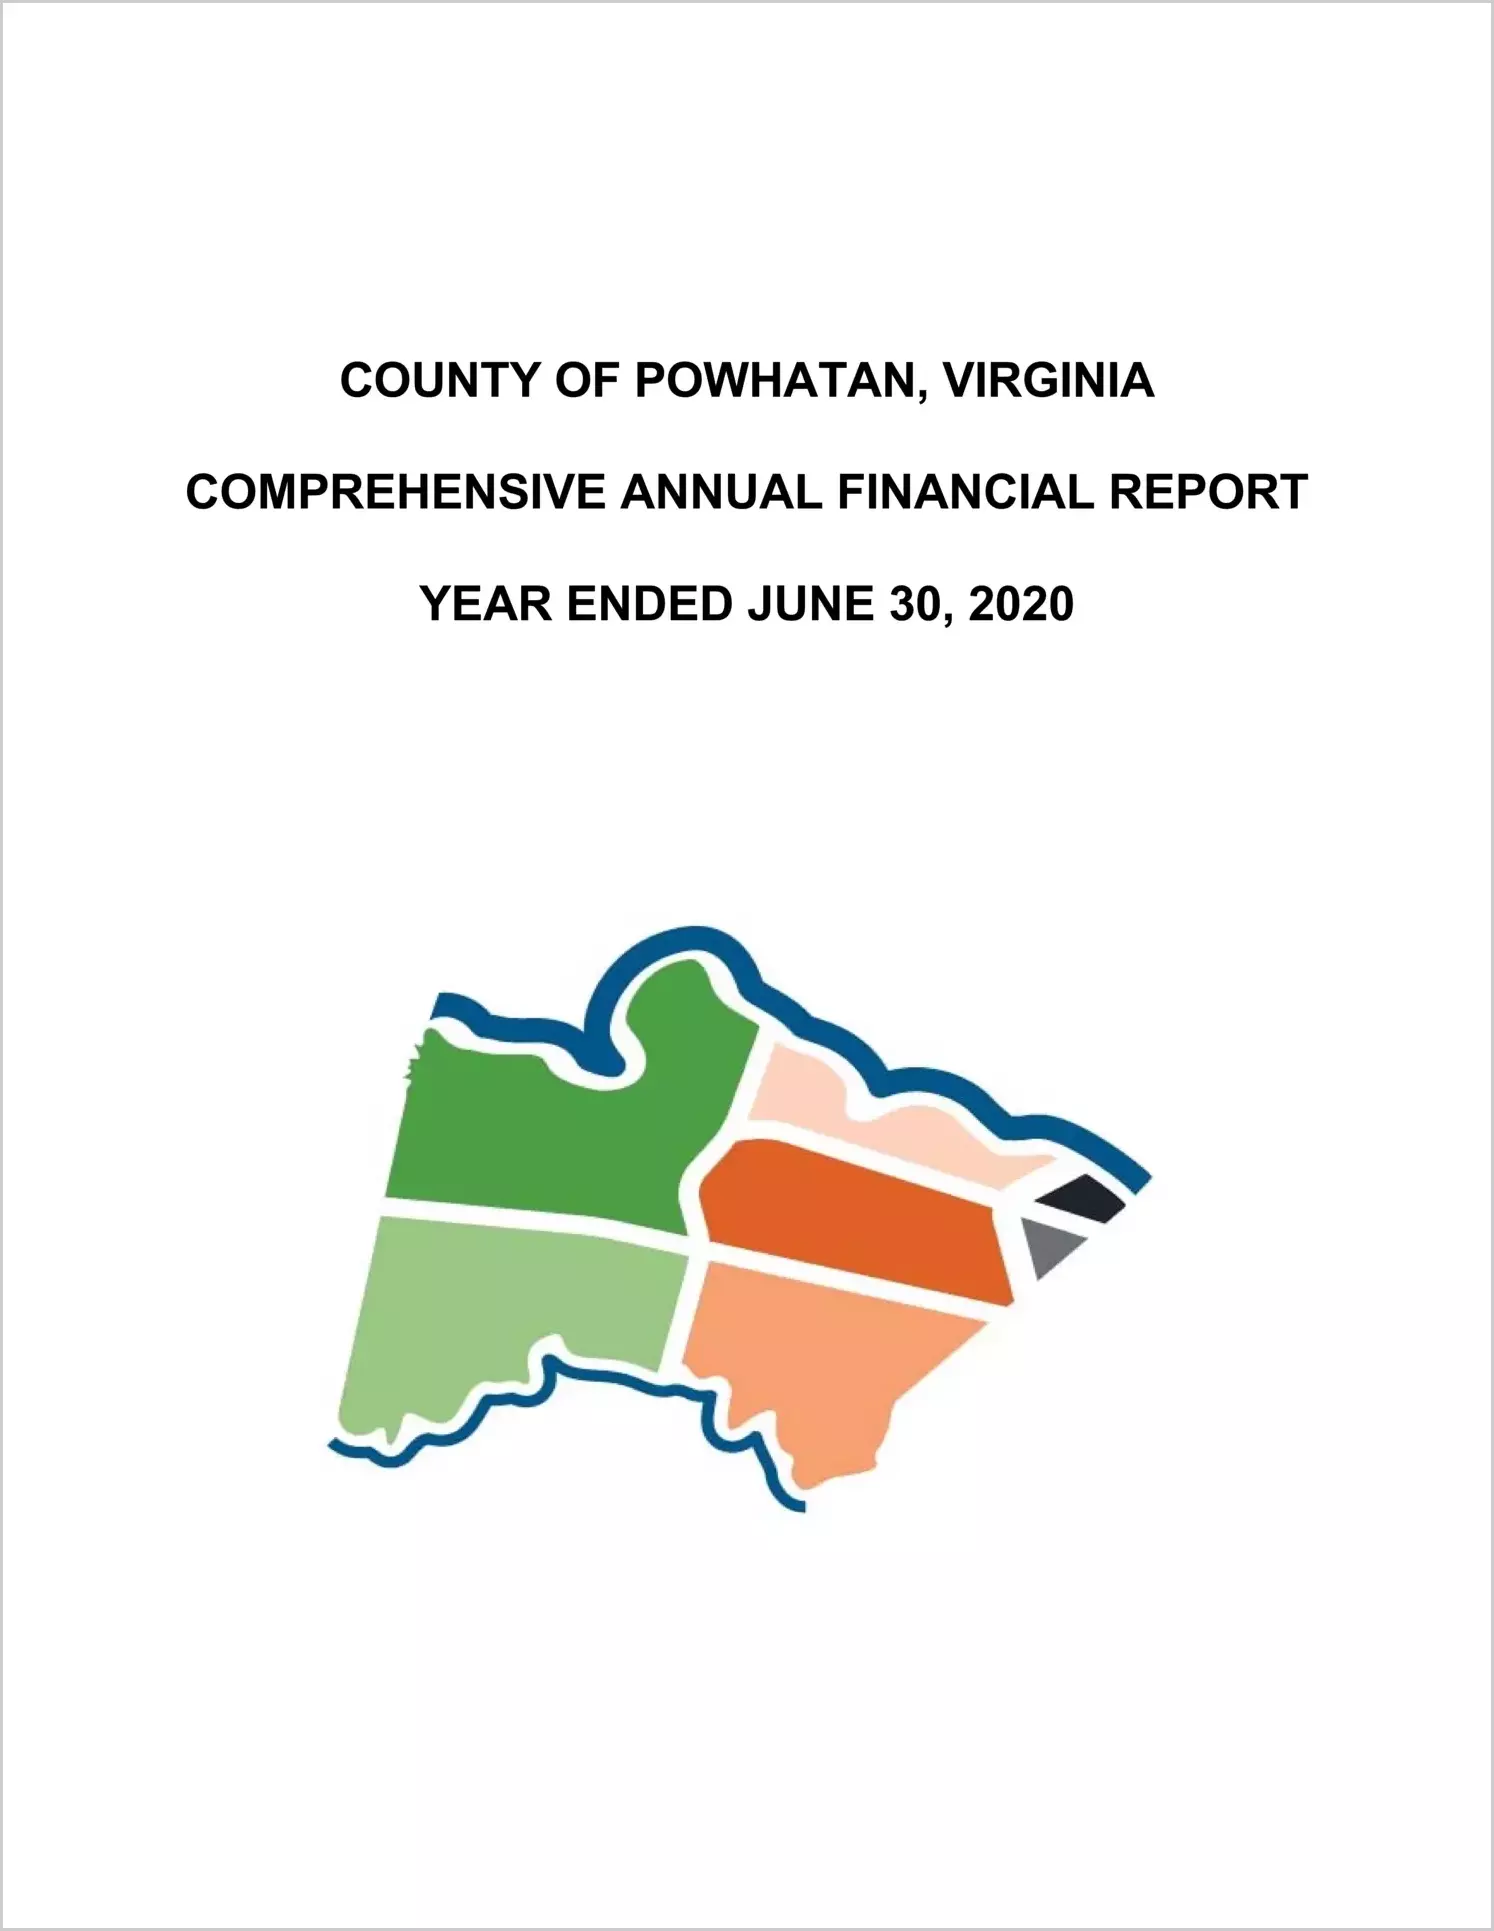 2020 Annual Financial Report for County of Powhatan